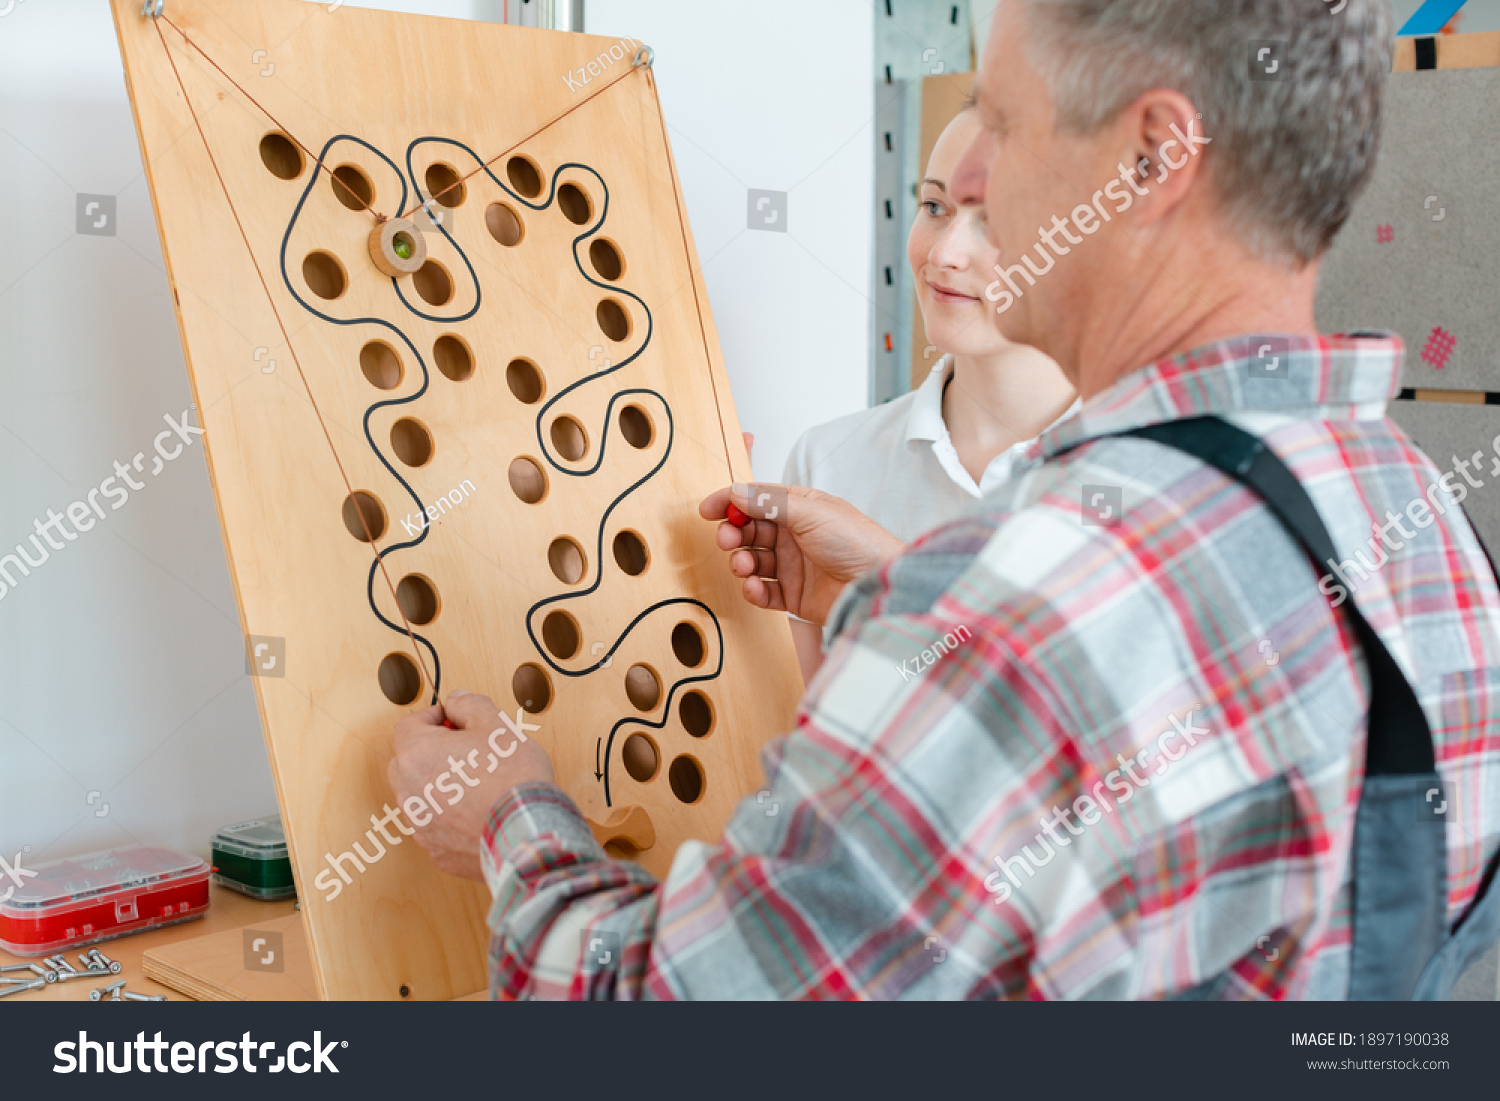 Man with therapist in occupational therapy testing his dexterity on a game board #1897190038